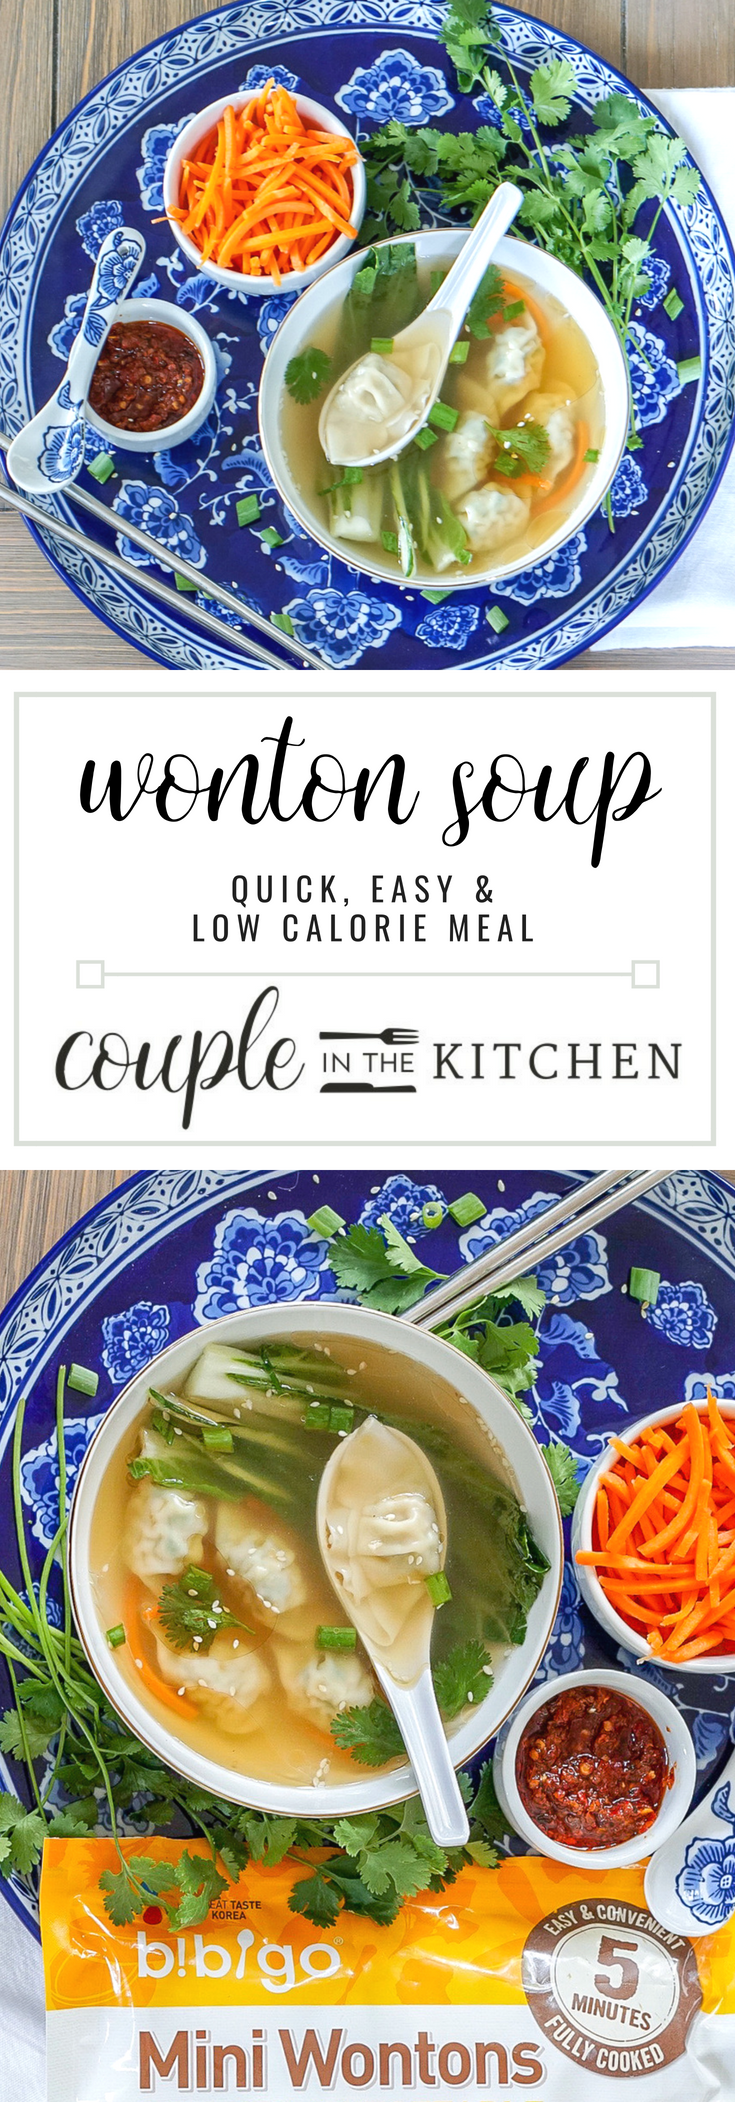 Homemade Wonton Soup (with Video Step-by-Step!) - Kirbie's Cravings